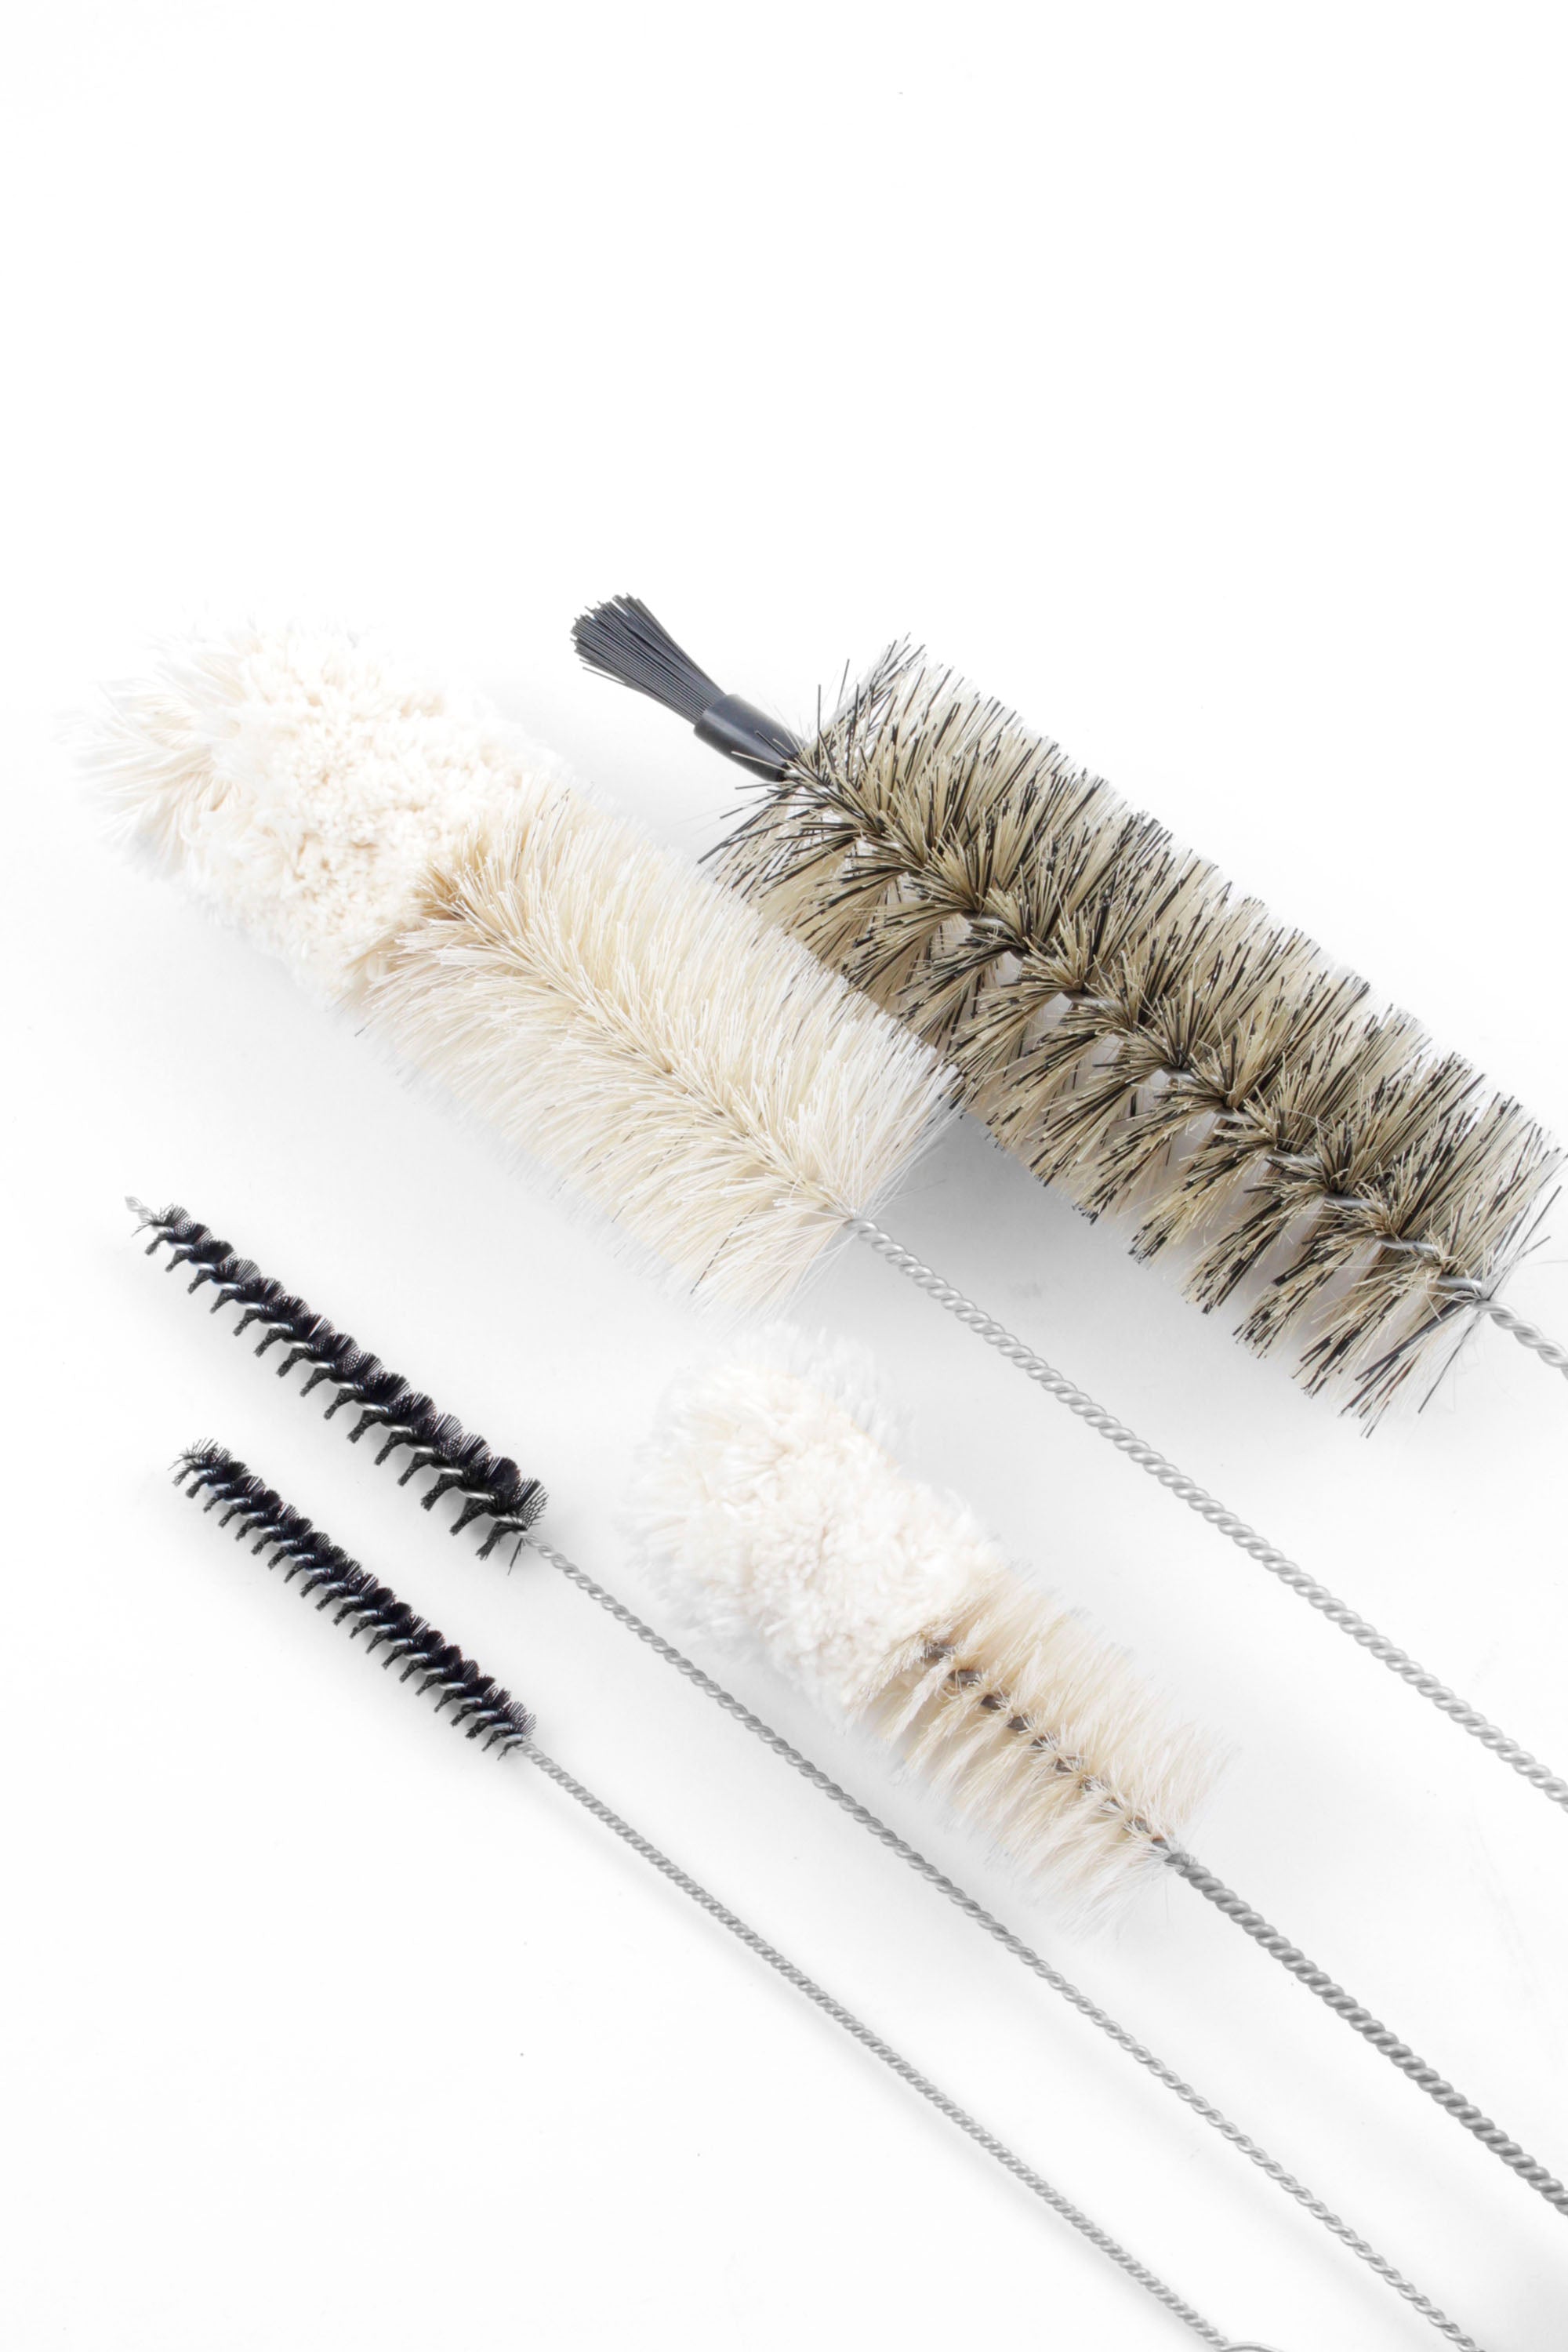 Andrée Jardin Tapered Conical Swab Brush Utilities Andrée Jardin Andrée Jardin Back in stock Brand_Andrée Jardin Home_Household Cleaning Kitchen_Accessories AJ_Bottle_Brush_Family_A